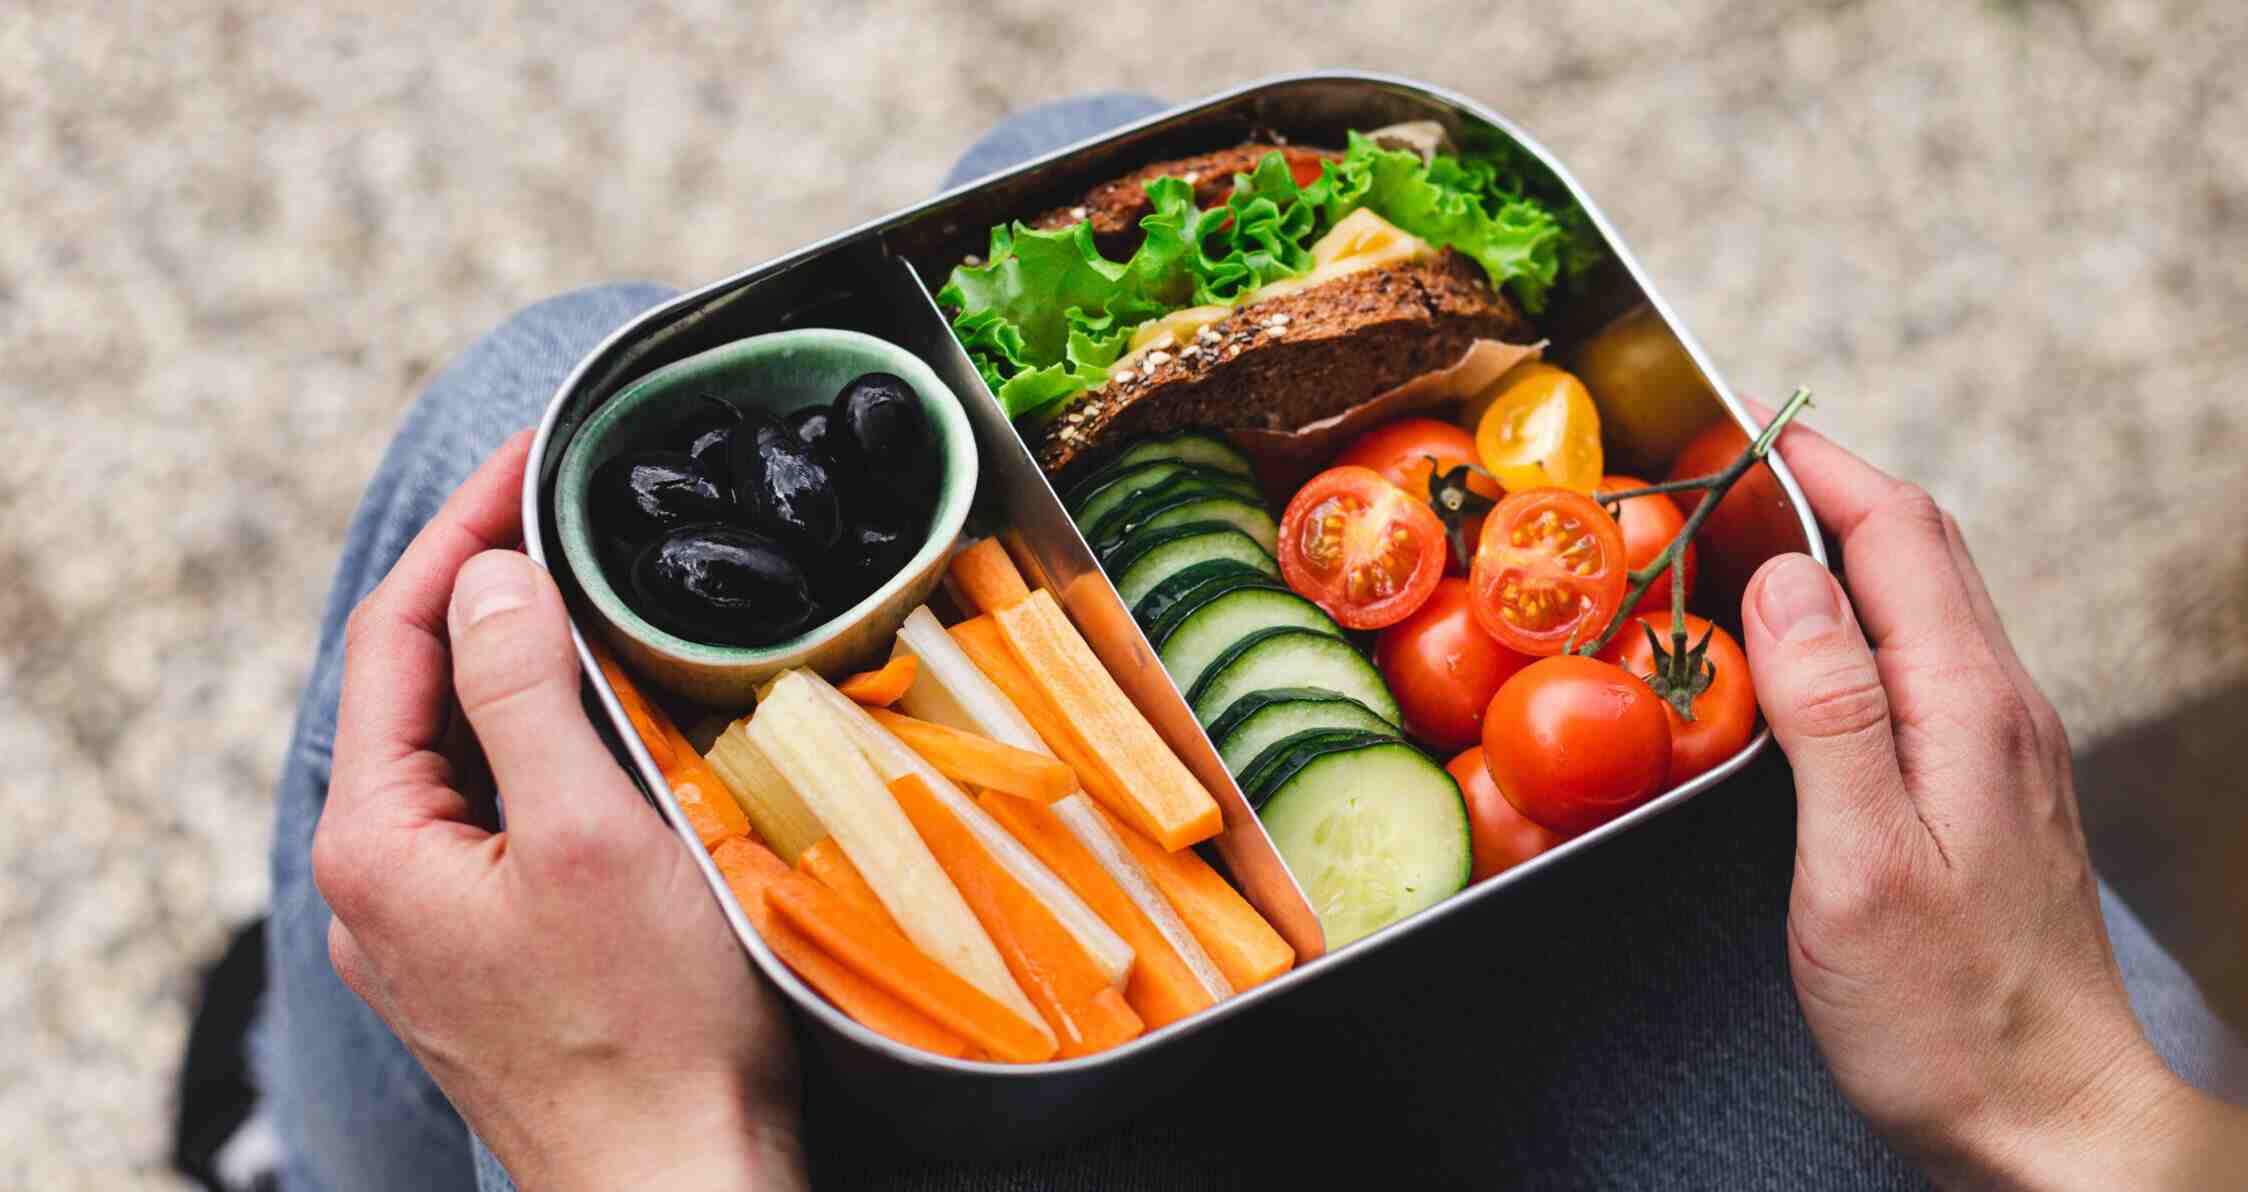 How to Build a Healthy & Nutritious Low Carb Lunch Kit